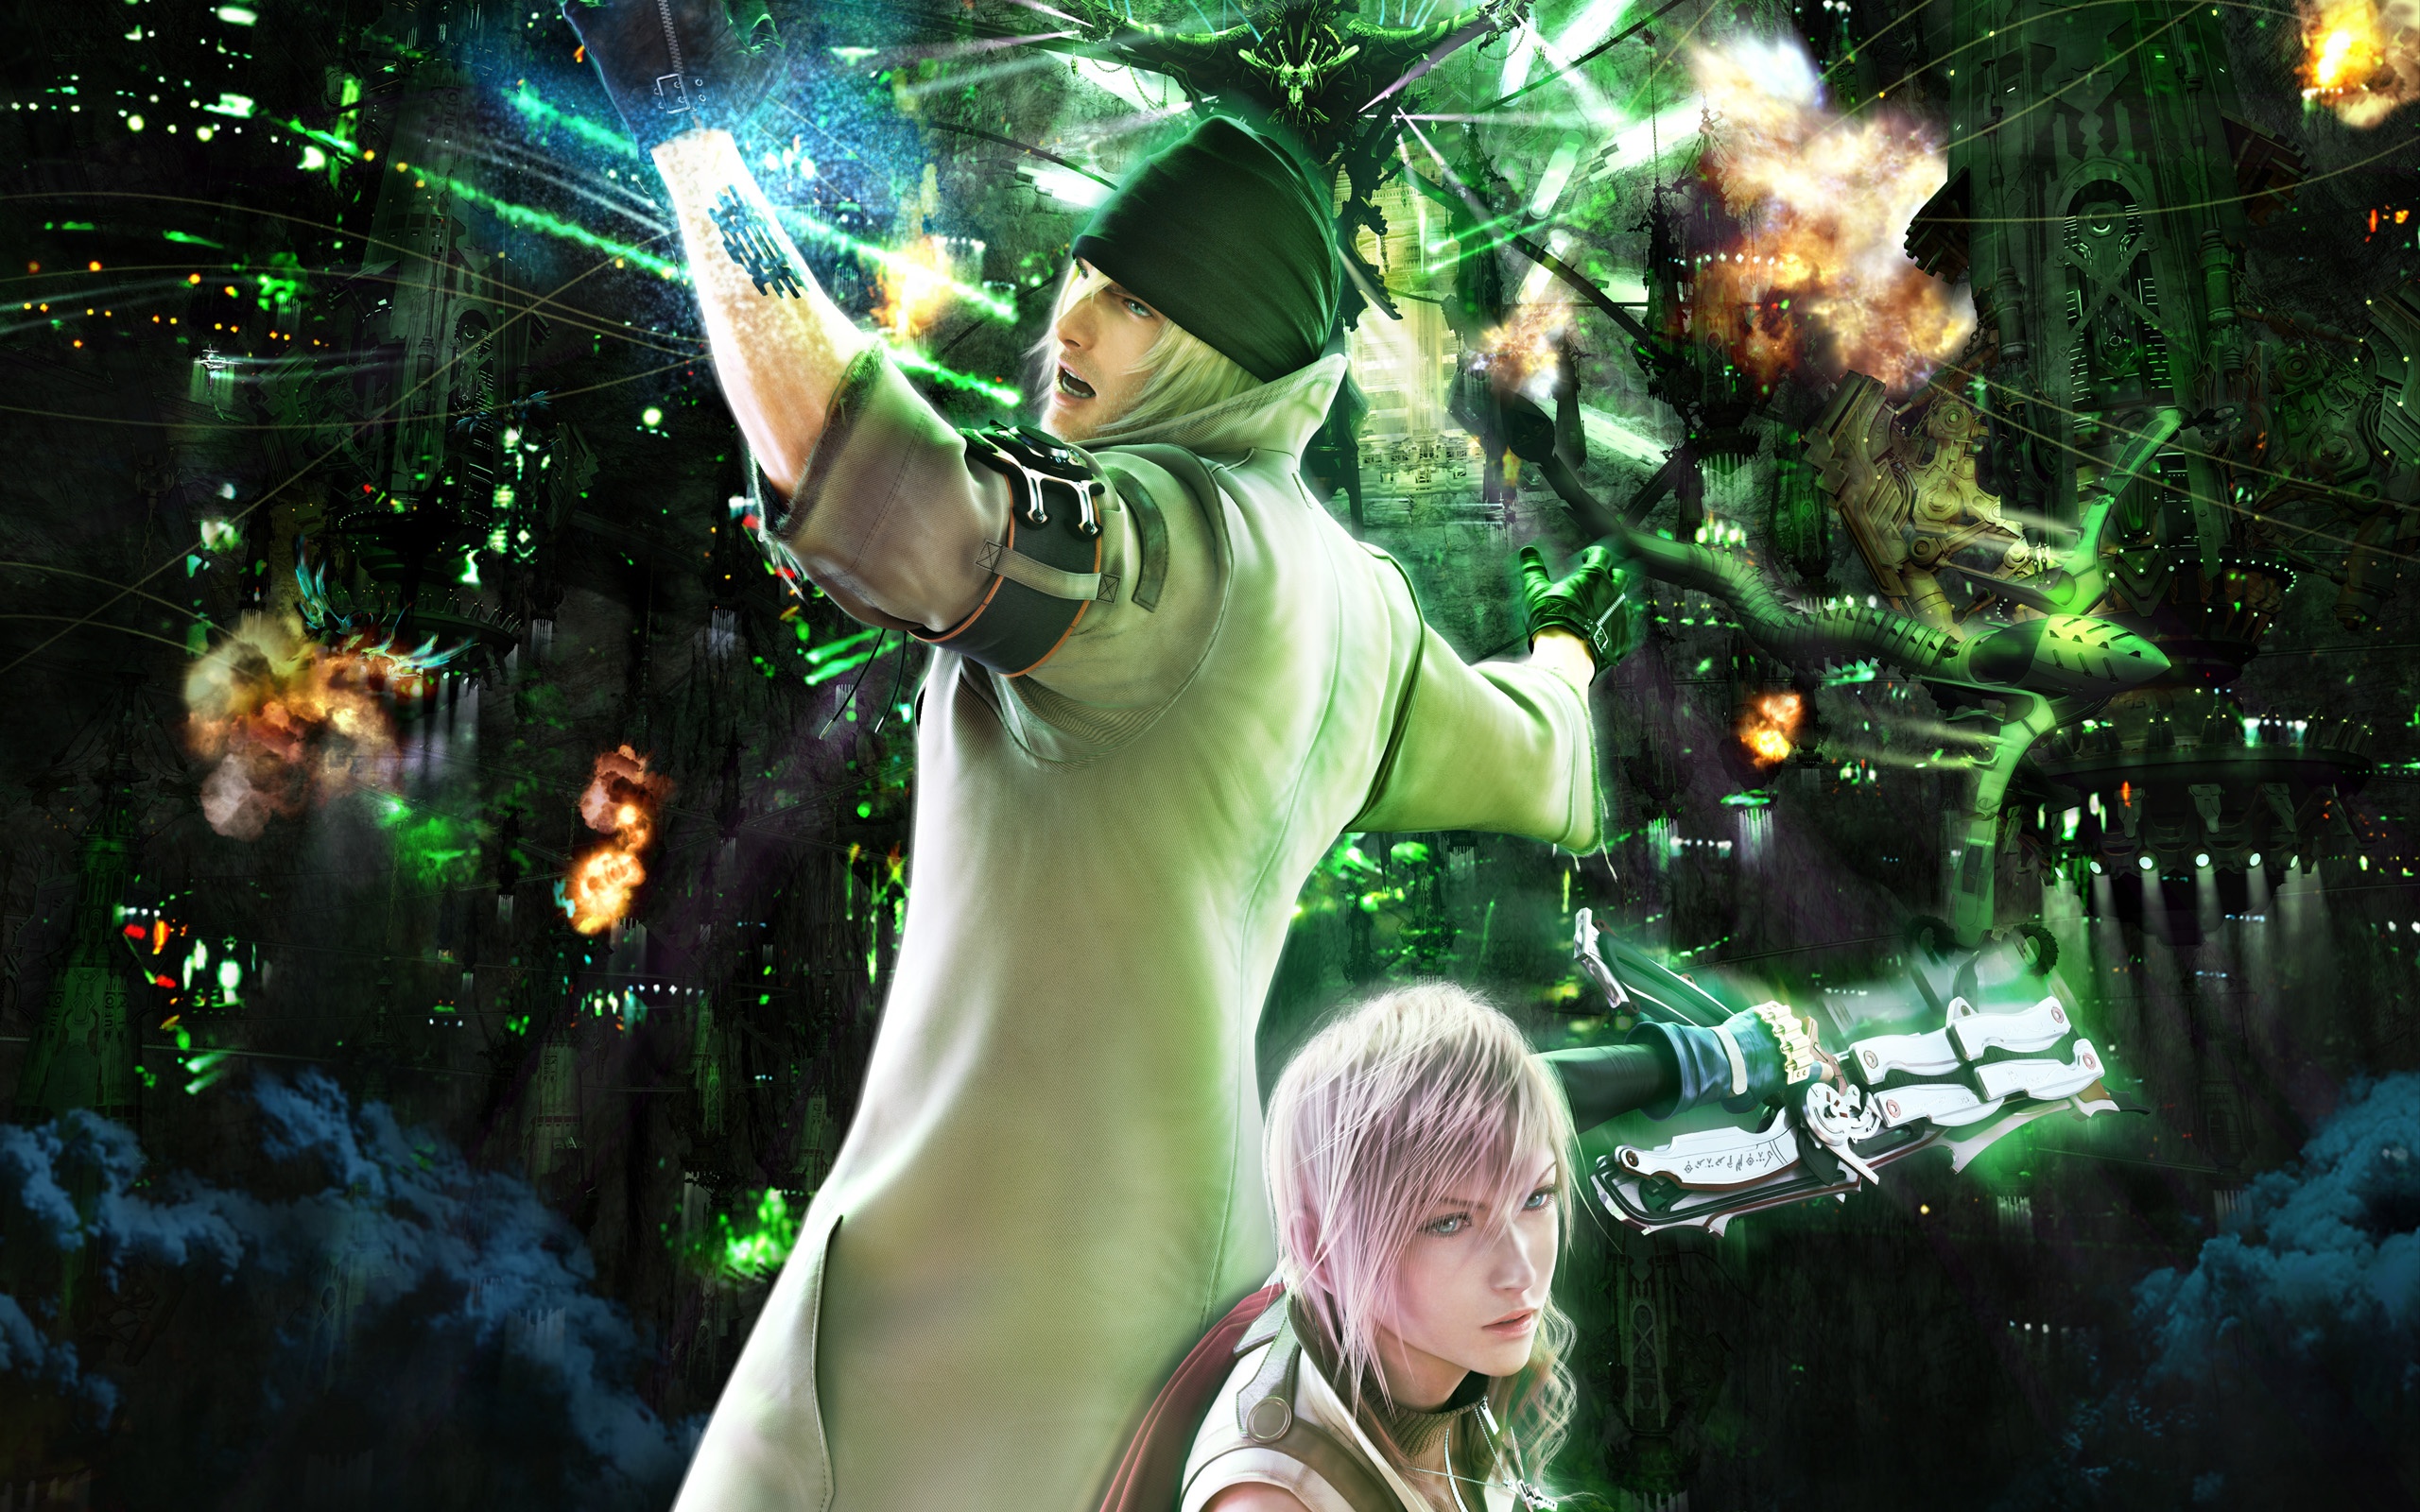 Snow Villiers and Lightning from Final Fantasy XIII in a video game desktop wallpaper.